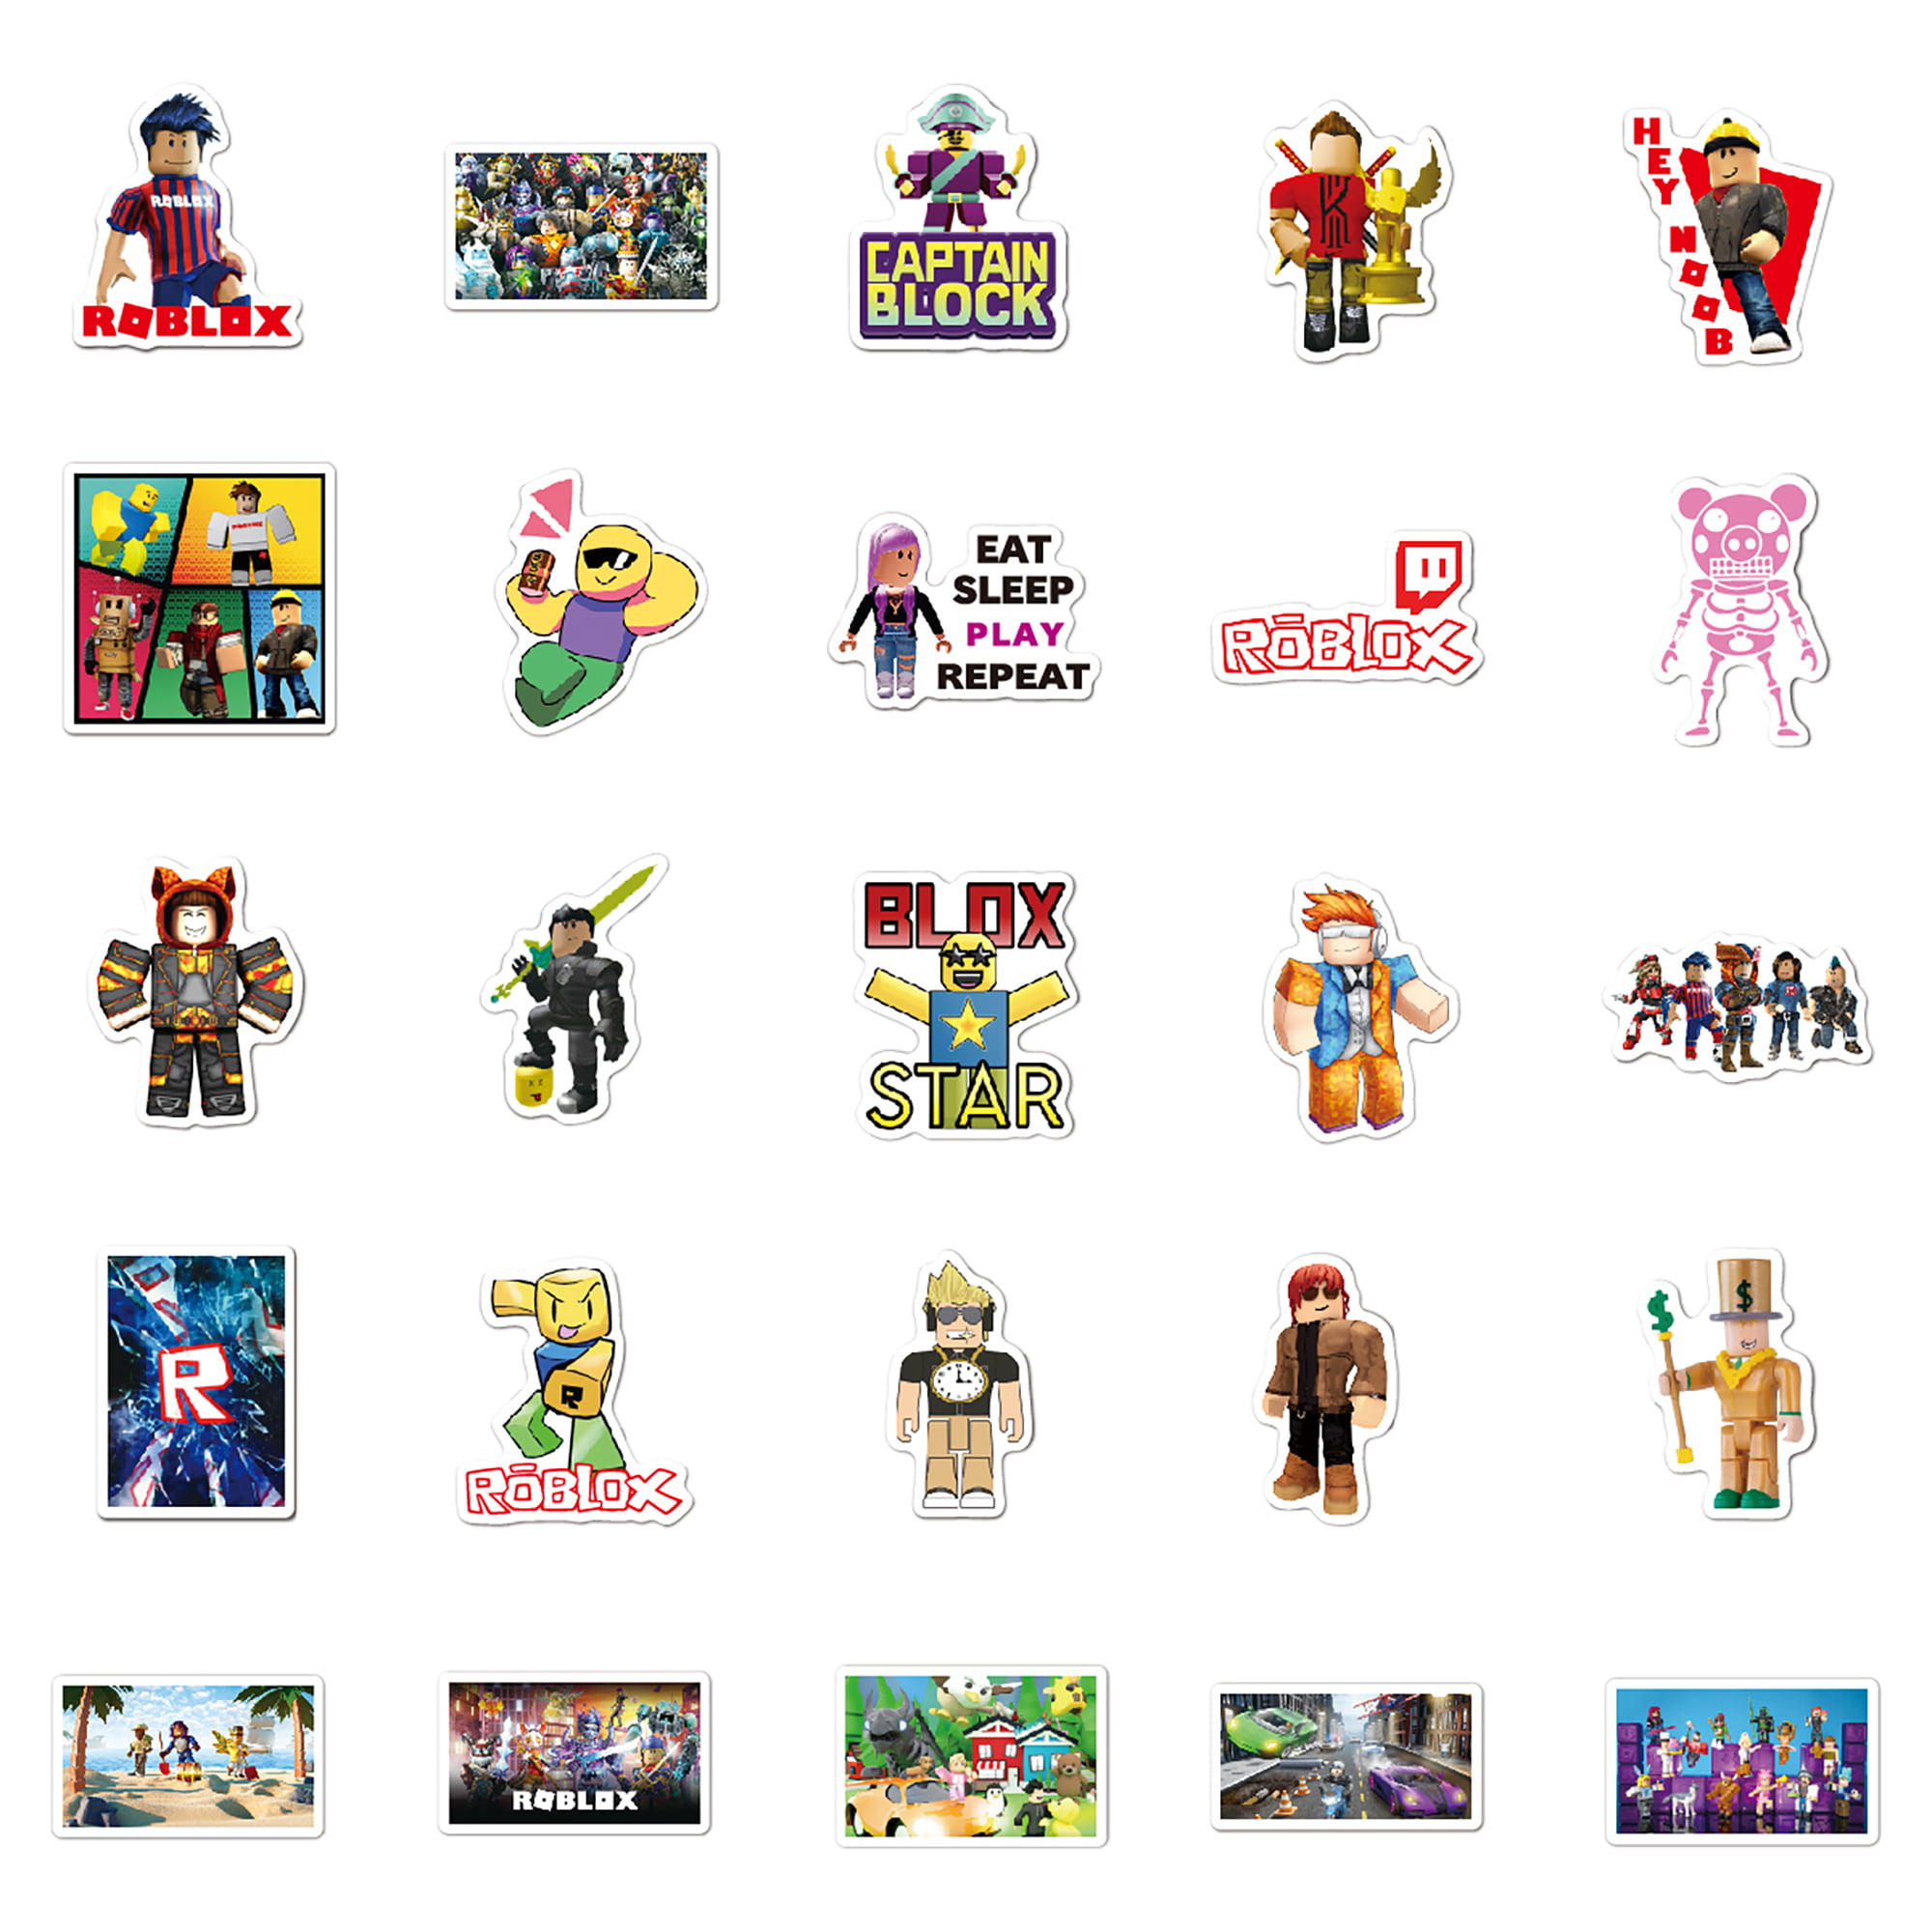 Roblox Sticker Pack 100pcs Sticker Decals Best Gift For Kids Children Teens Waterproof Online Gaming Stickers Pack For Home Decor Phone Hydro Flasks Water Bottle Bicycle Skateboard Laptop Pads Luggage Walmart Com Walmart Com - eat the water roblox